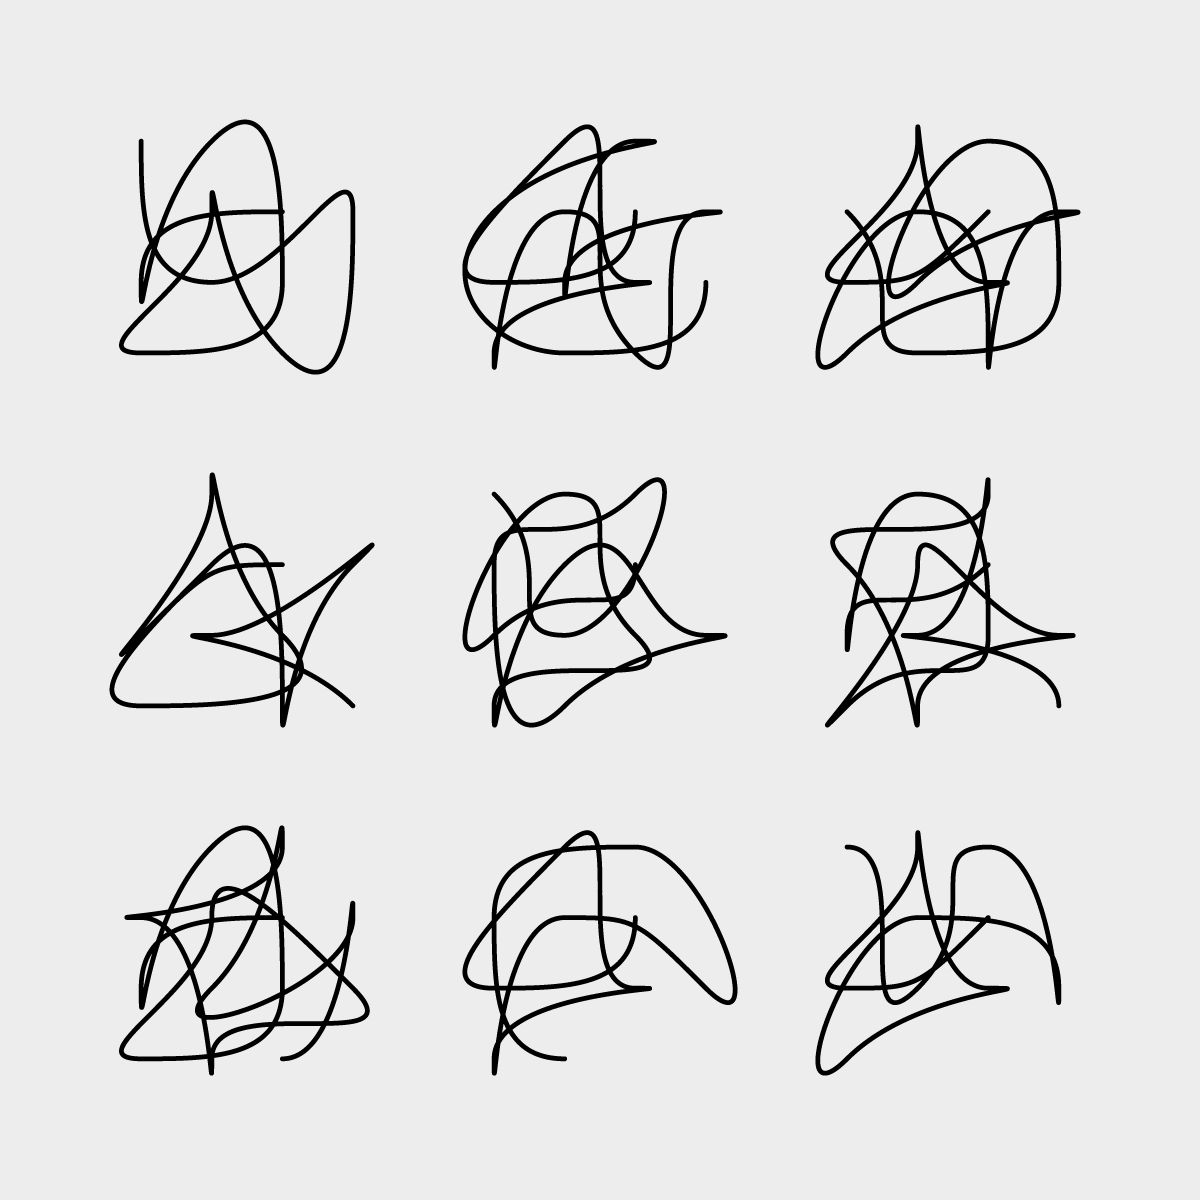 Nine scribbled lines that each occupy roughly the same size and (square) shape.